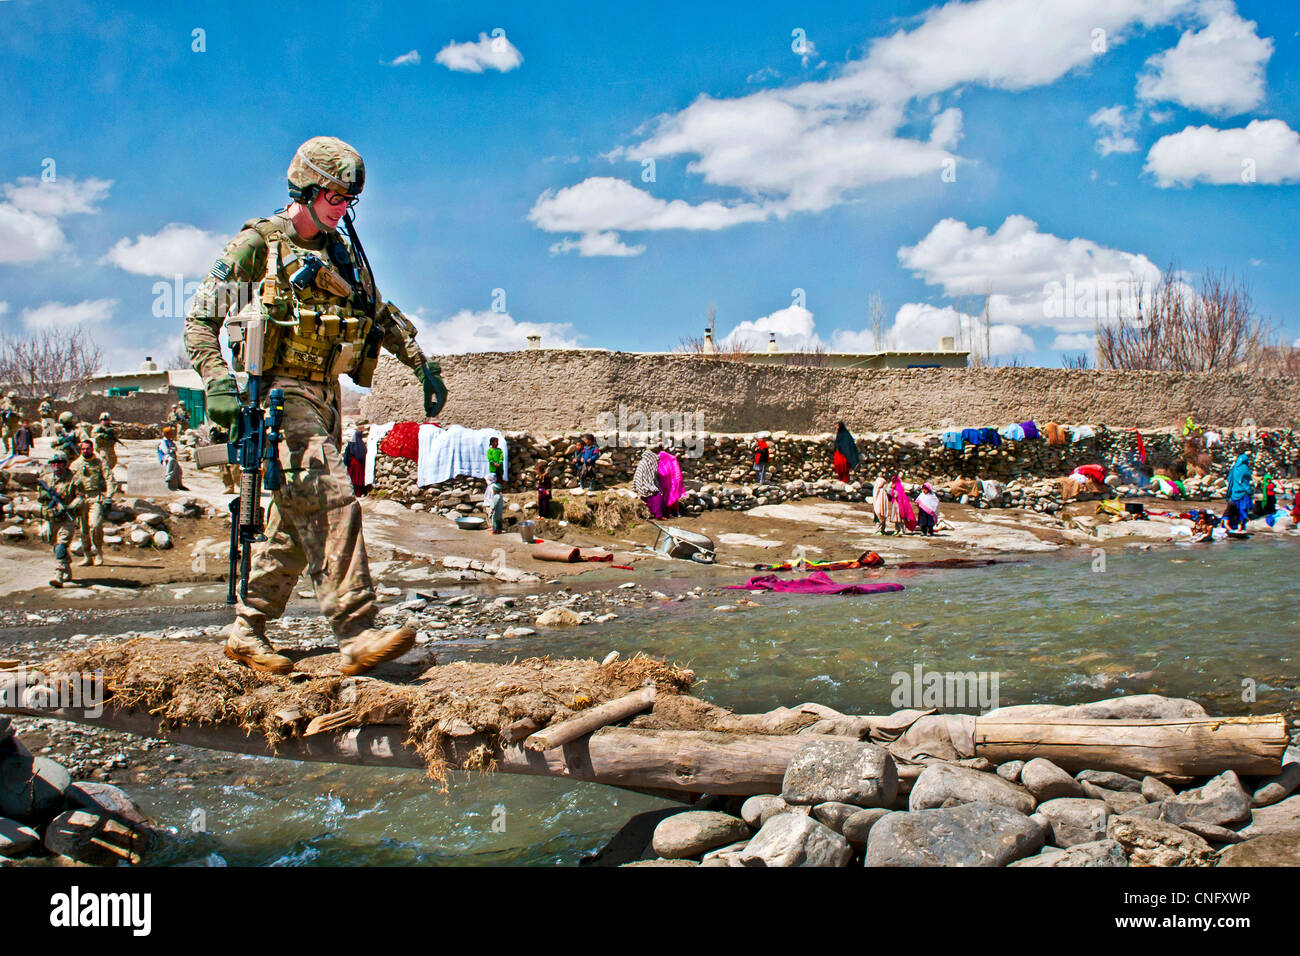 A US soldier walks across a primitive foot bridge over a swollen river on patrol April 4, 2012 outside of the village of Marzak, Afghanistan. Marzak has historically been a stronghold for the insurgency over the past decade until the Afghan and US forces established a local police force and secured Stock Photo